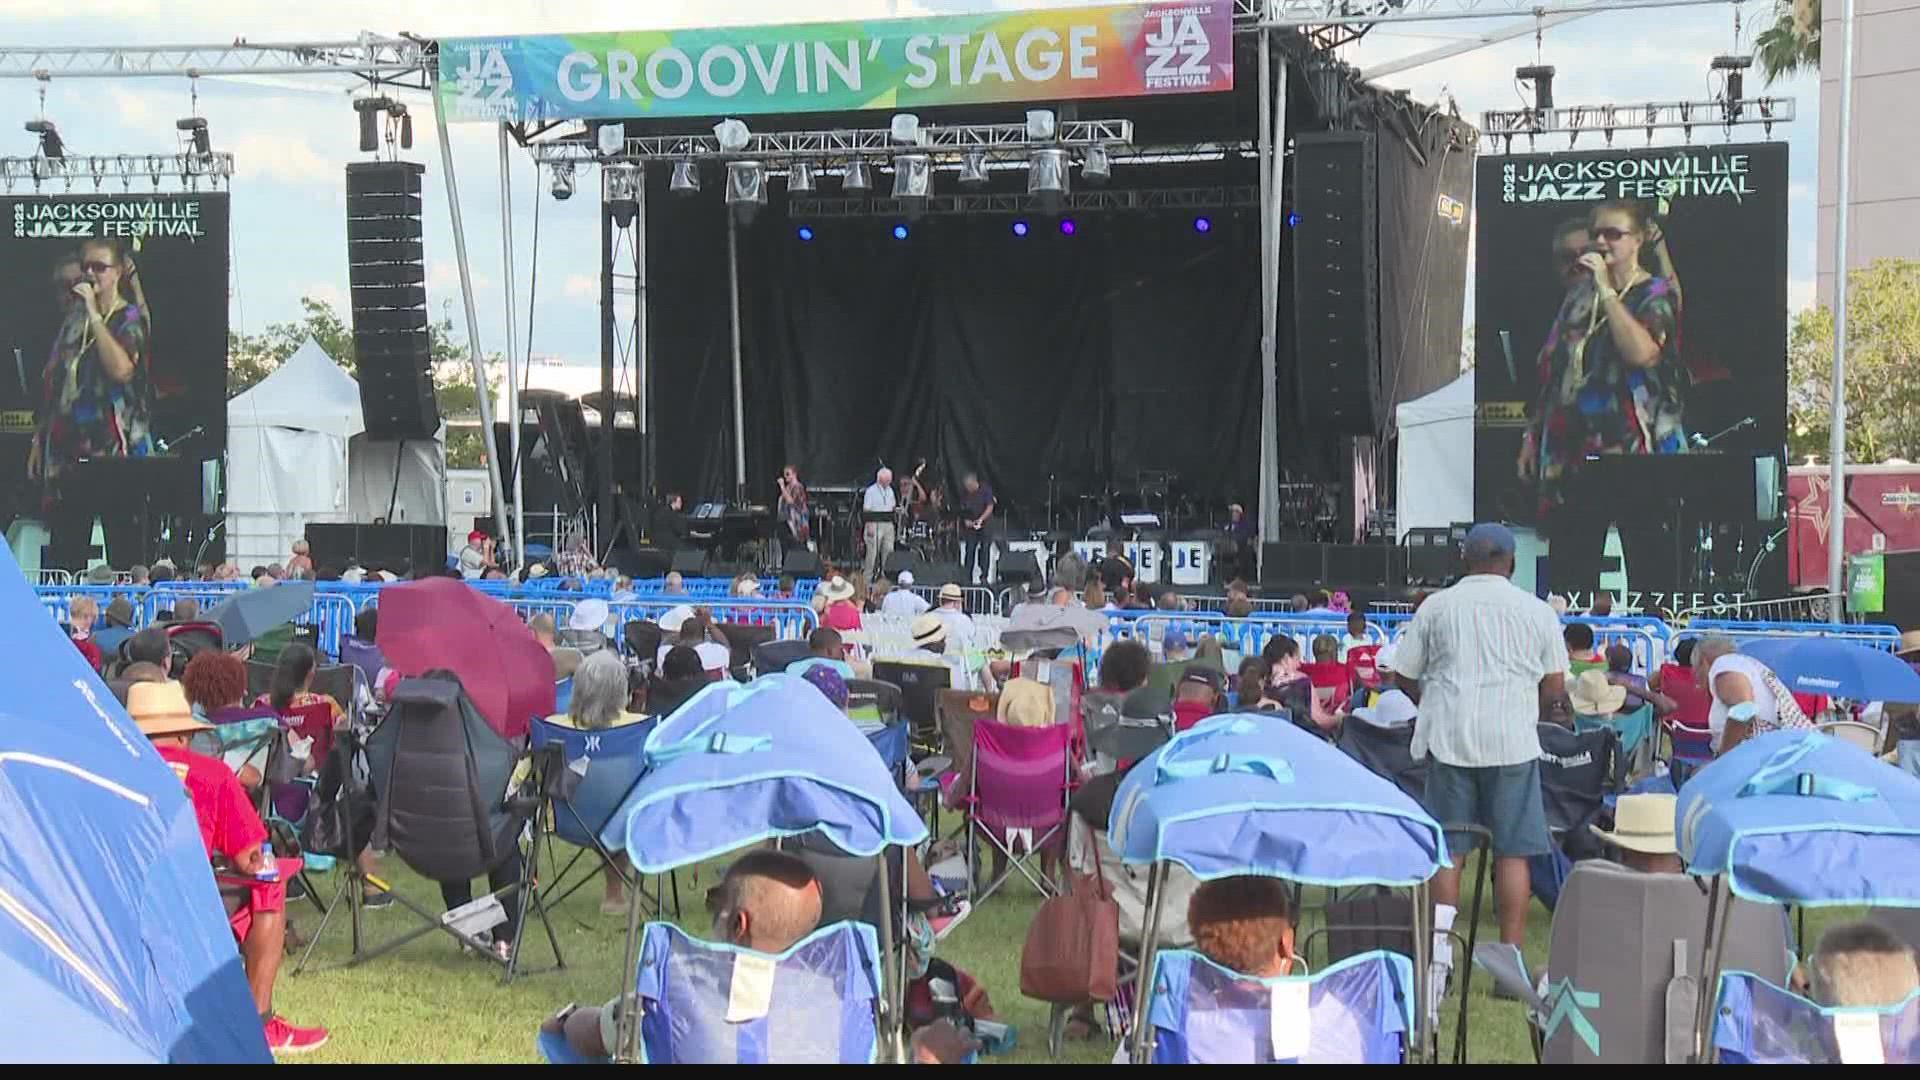 The last day of Jacksonville Jazz Fest is upon us. Lots to see and hear and eat! Get your lawn chair ready.